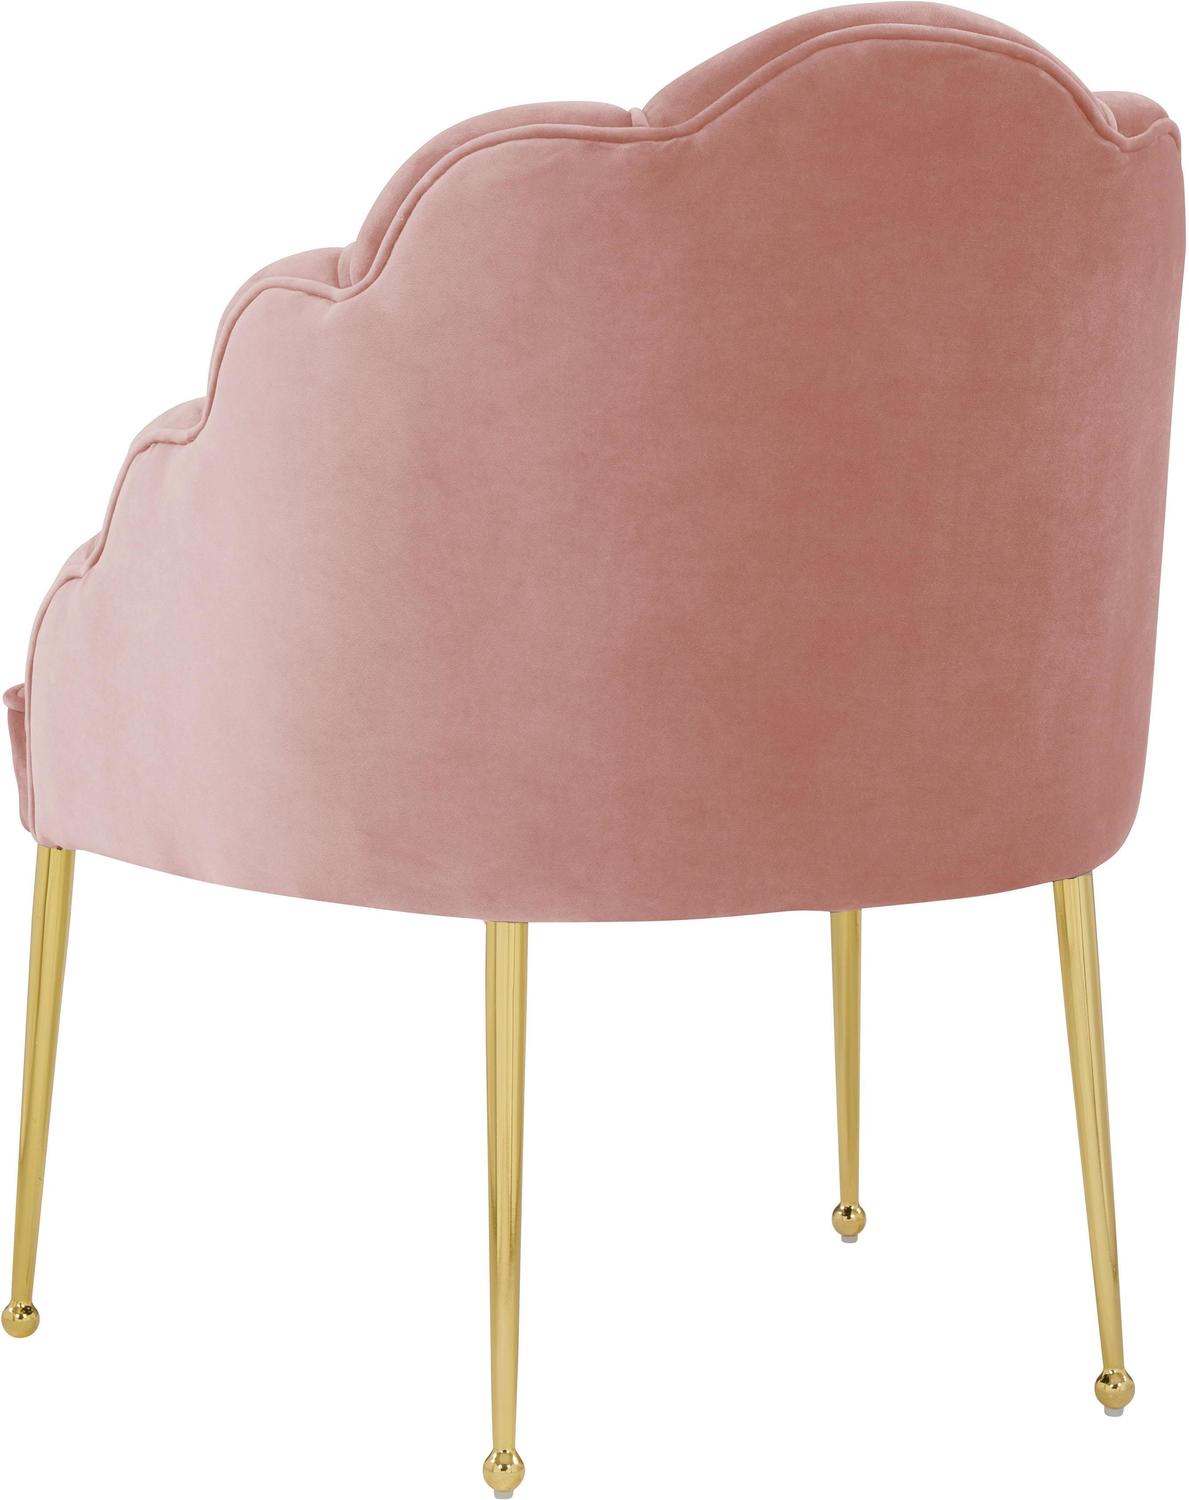 velvet lounge chair Contemporary Design Furniture Accent Chairs Blush